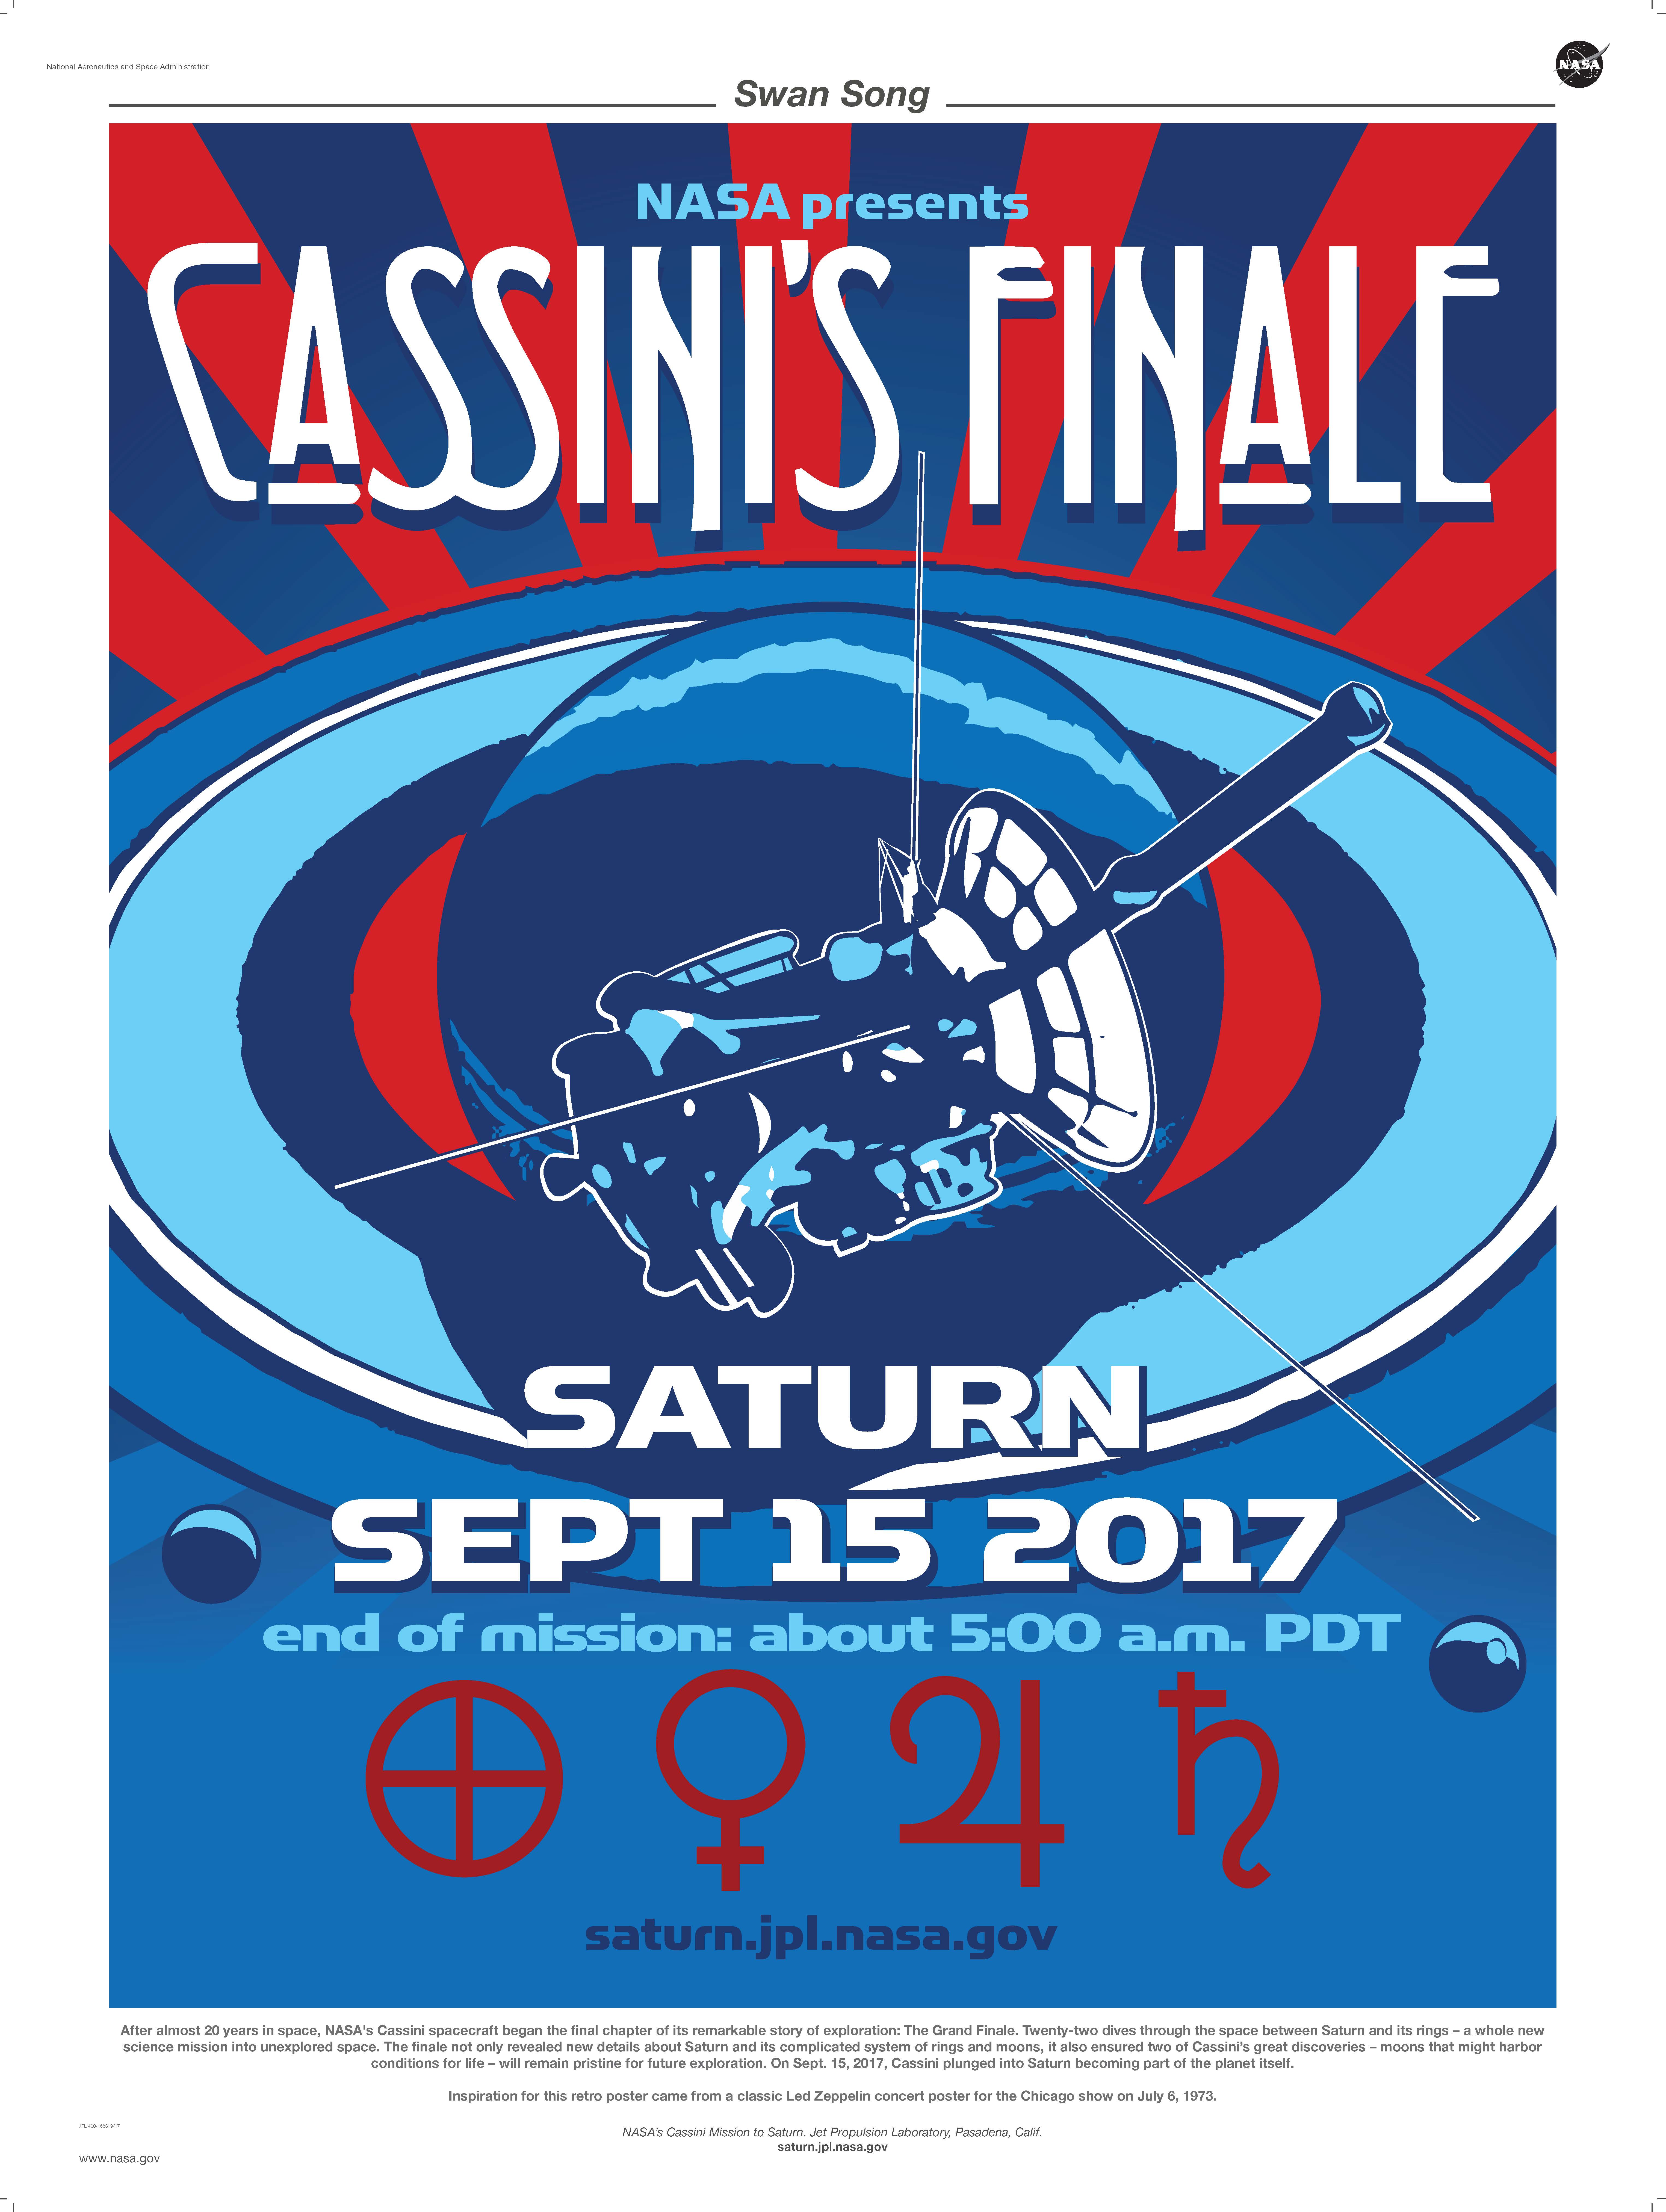 Cassini mission poster illustrated as a classic rock concert poster.